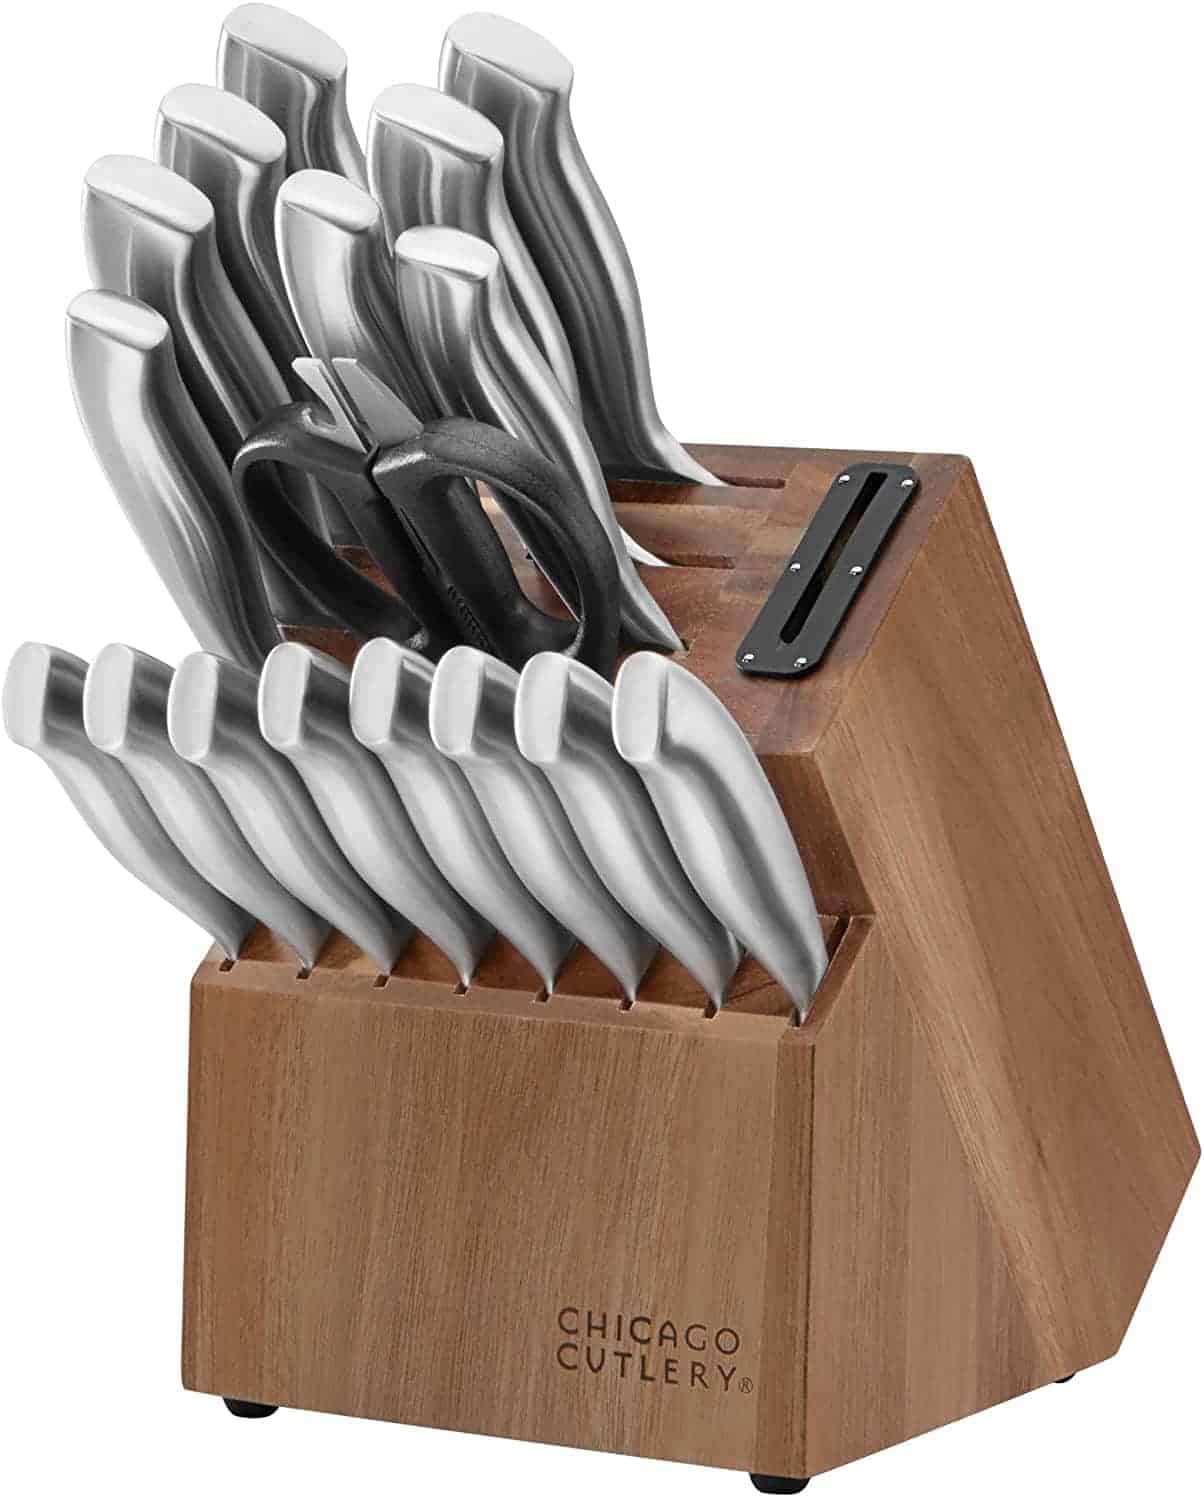 Chicago Cutlery Fusion Kitchen Knives